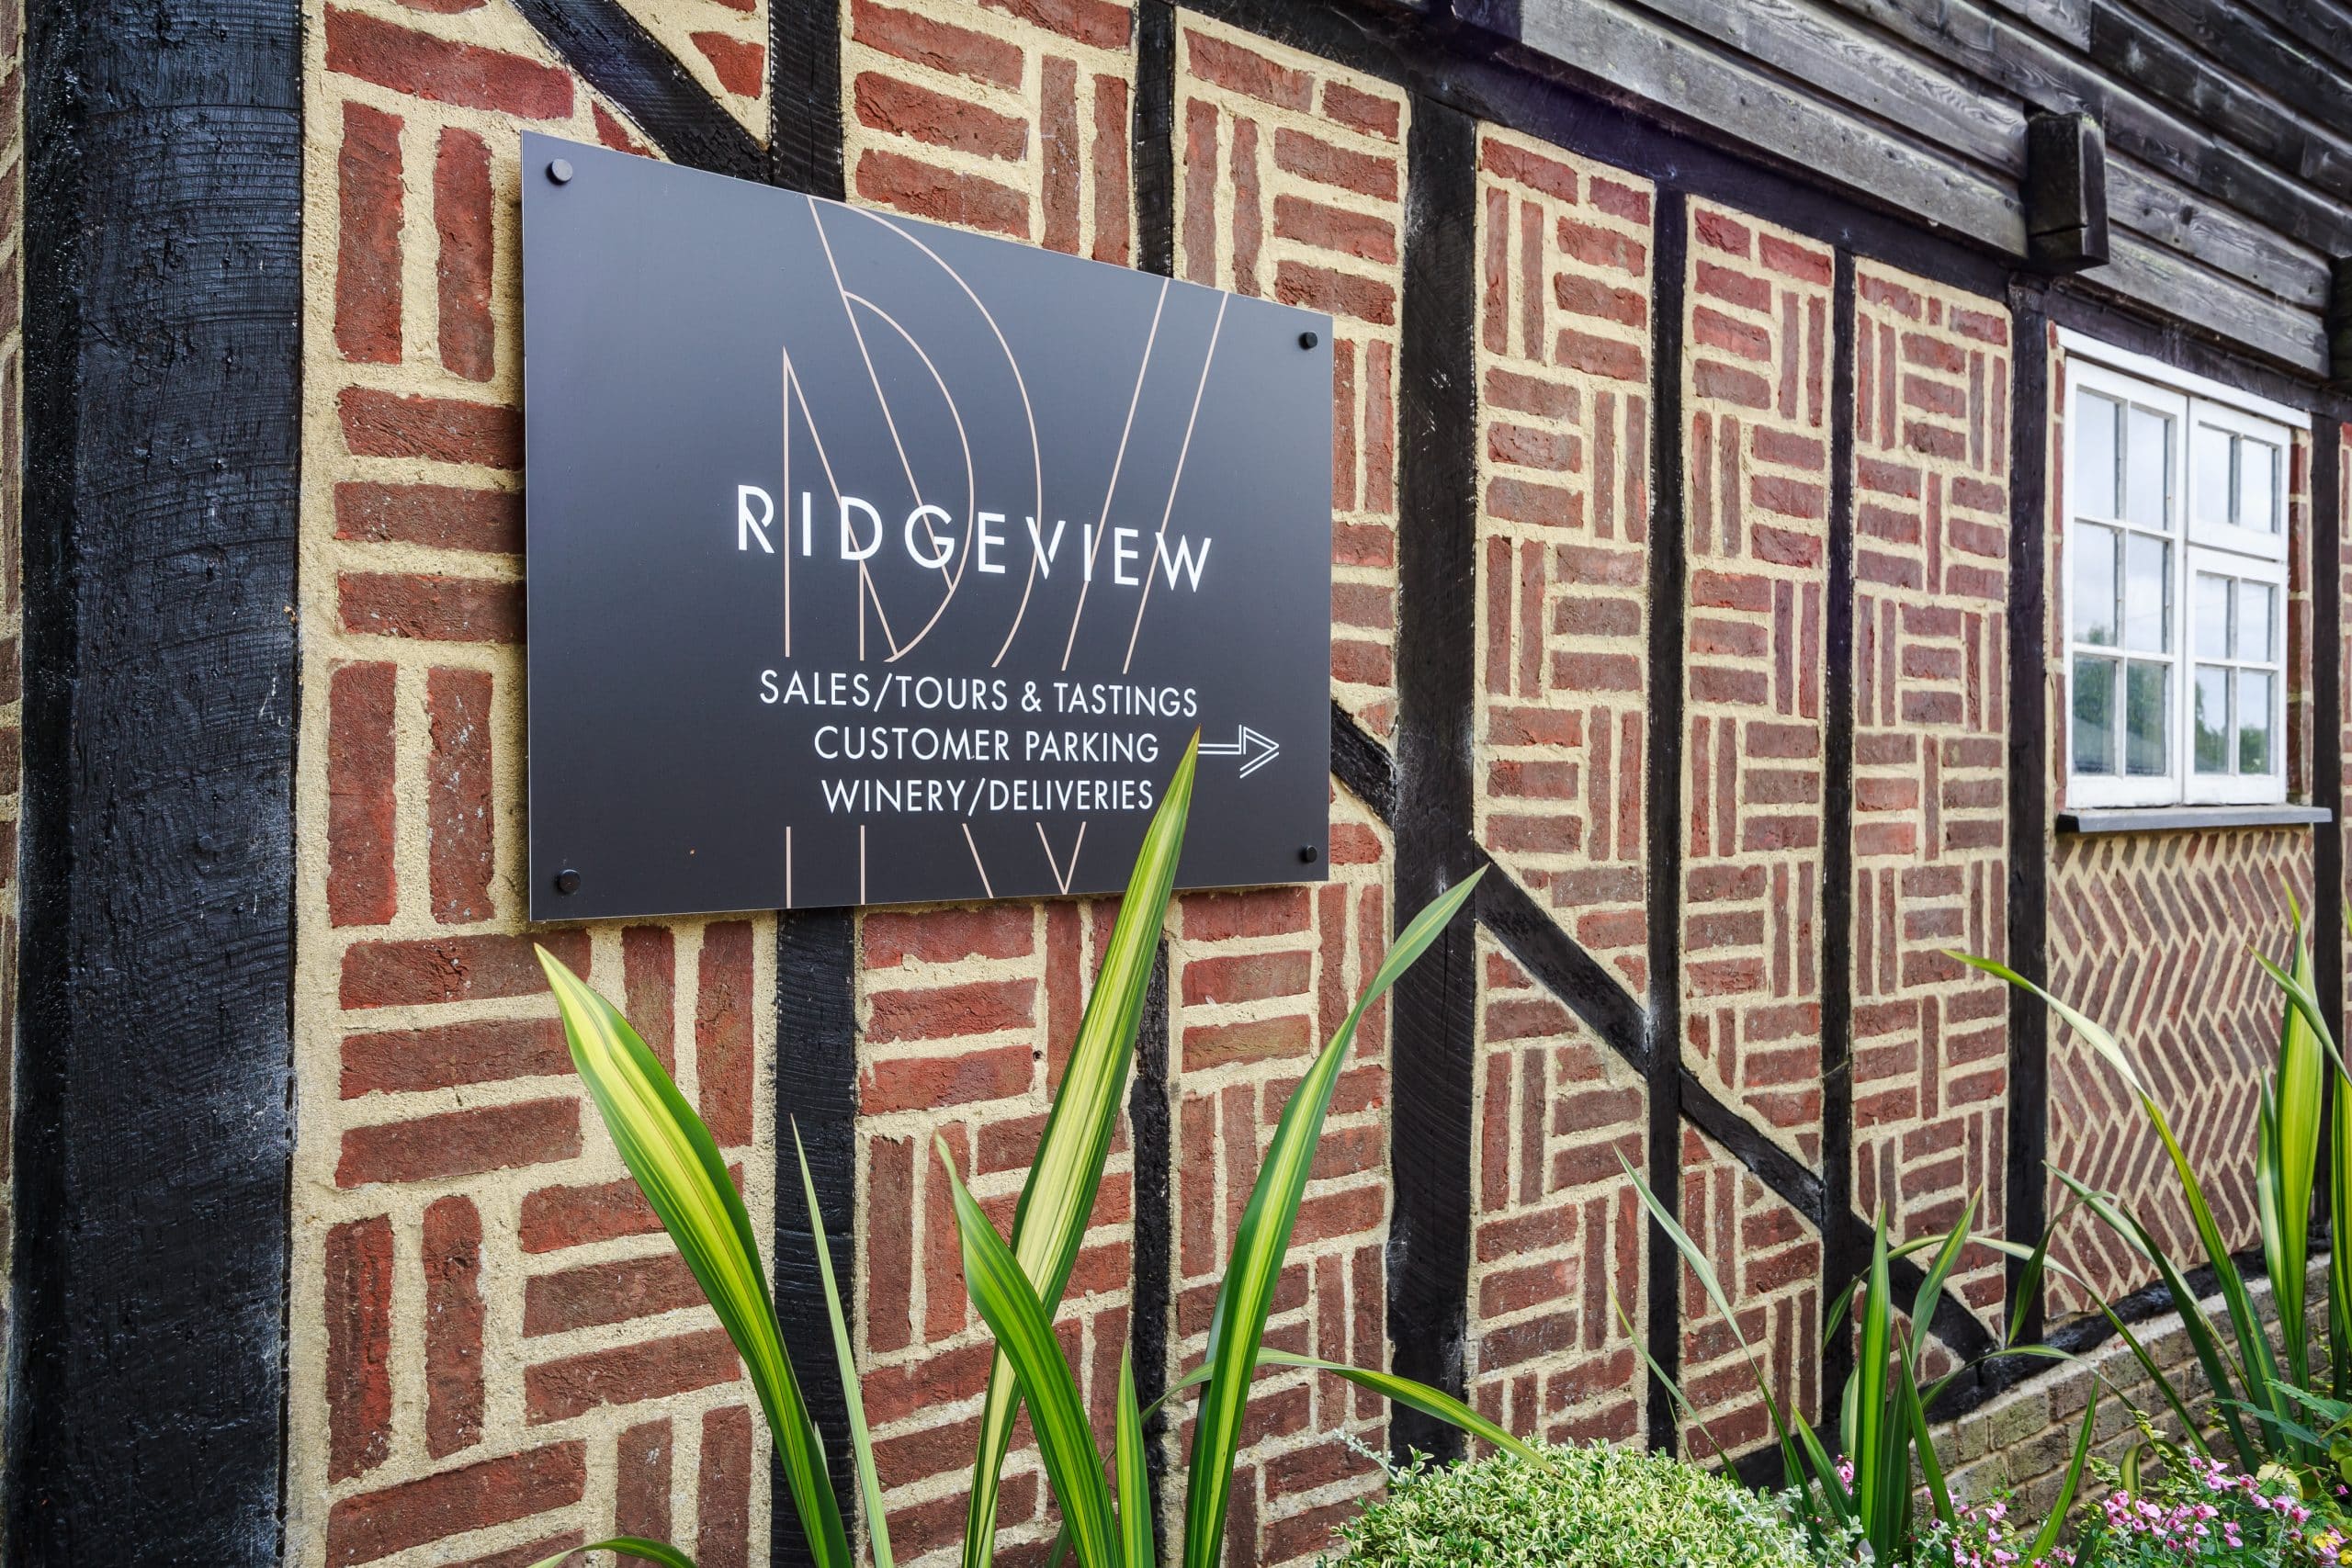 Ridgeview welcomes guests to a range of tours, tastings and dining experiences